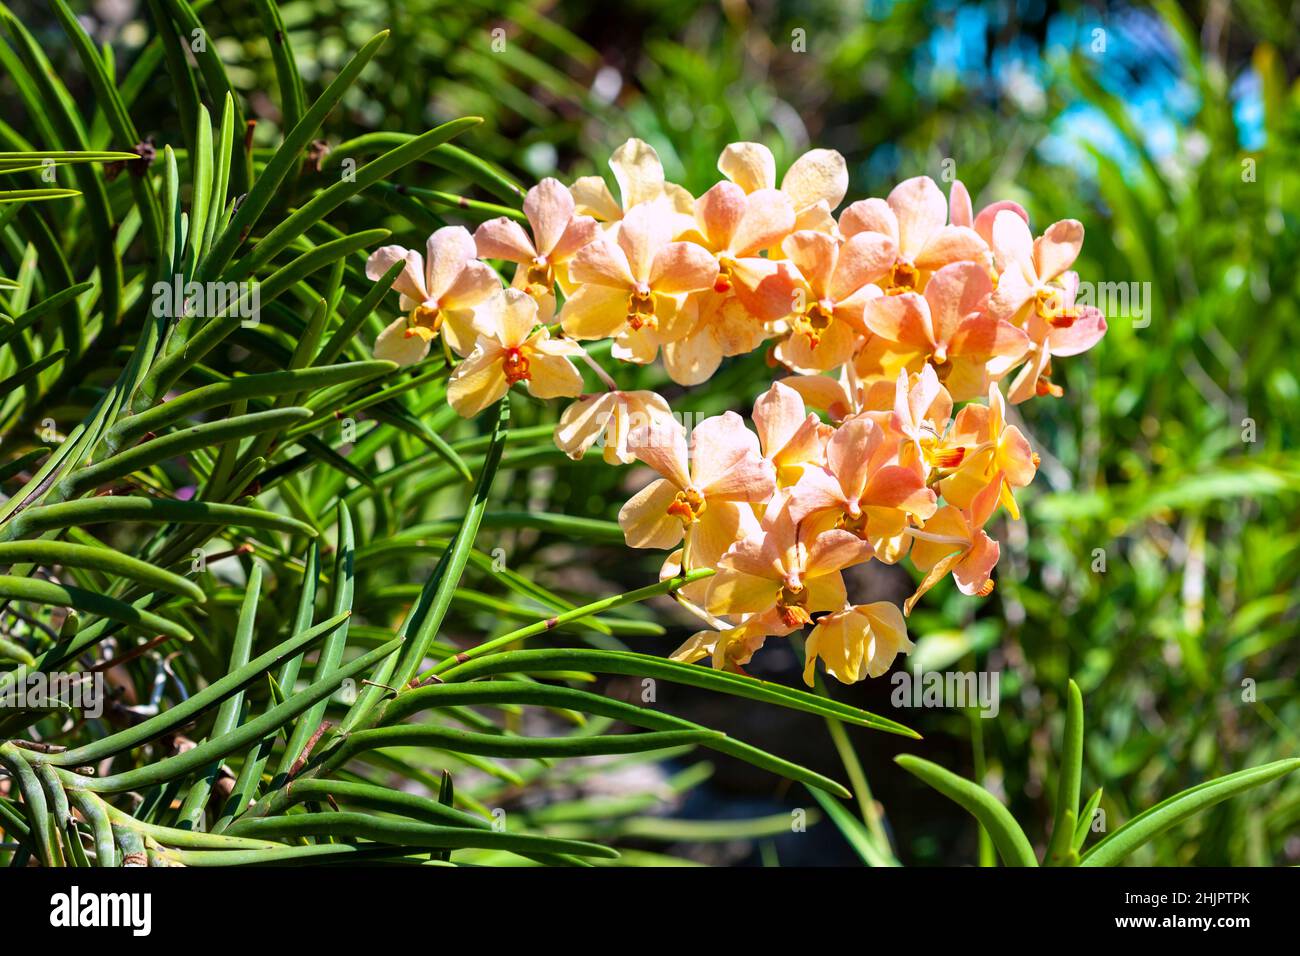 Colorful colors of Wanda orchid in the garden,Vanda Orchid Wanda - Queen of orchids,Beautiful purple flower organic purple orchid flowers blooming in Stock Photo